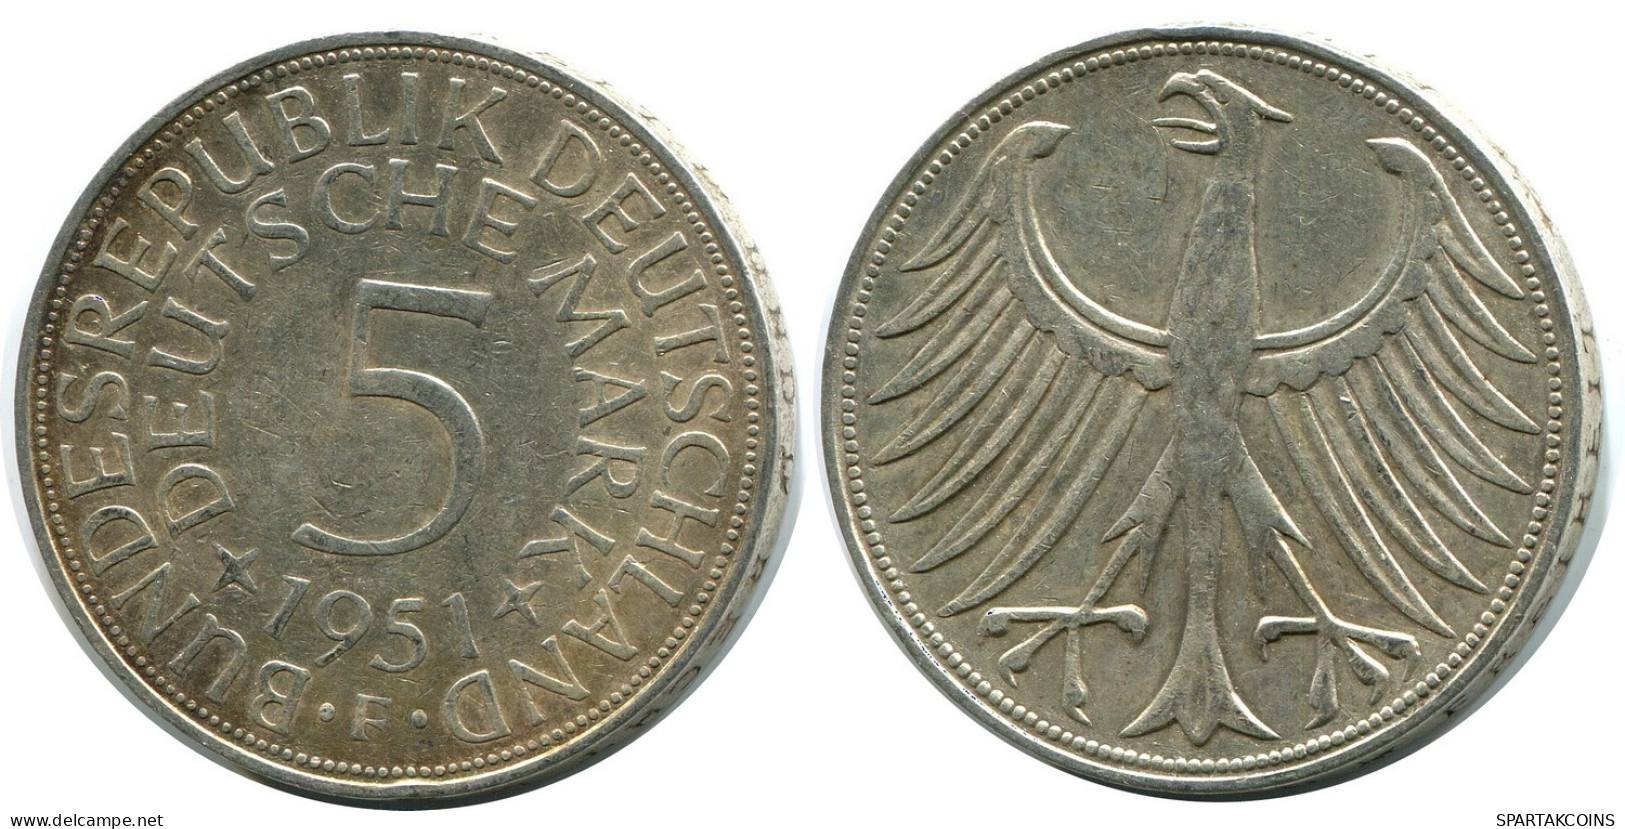 5 DM 1951 F WEST & UNIFIED GERMANY Coin #DB336.U.A - 5 Marcos